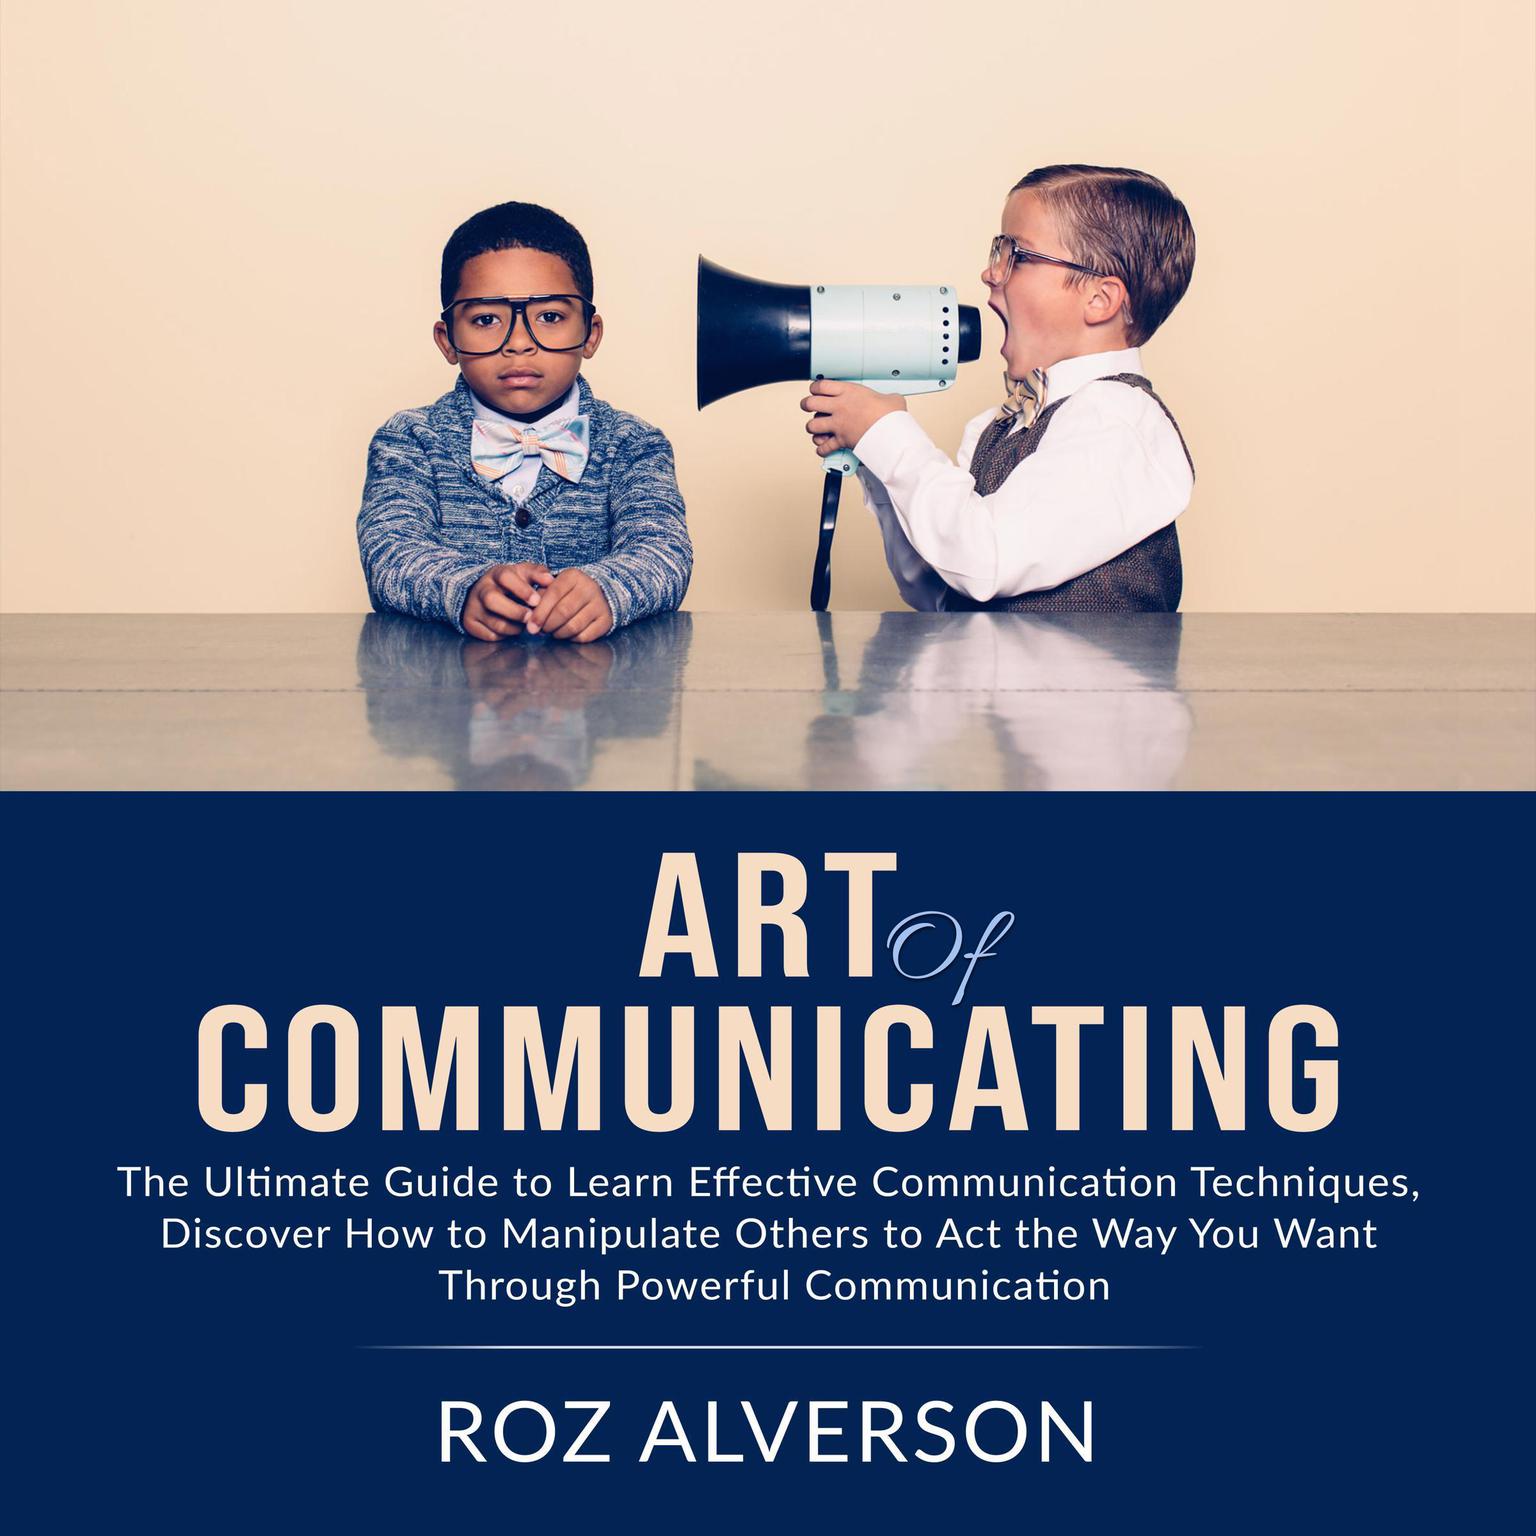 Art of Communicating: The Ultimate Guide to Learn Effective Communication Techniques, Discover How to Manipulate Others to Act the Way You Want Through Powerful Communication Audiobook, by Roz Alverson